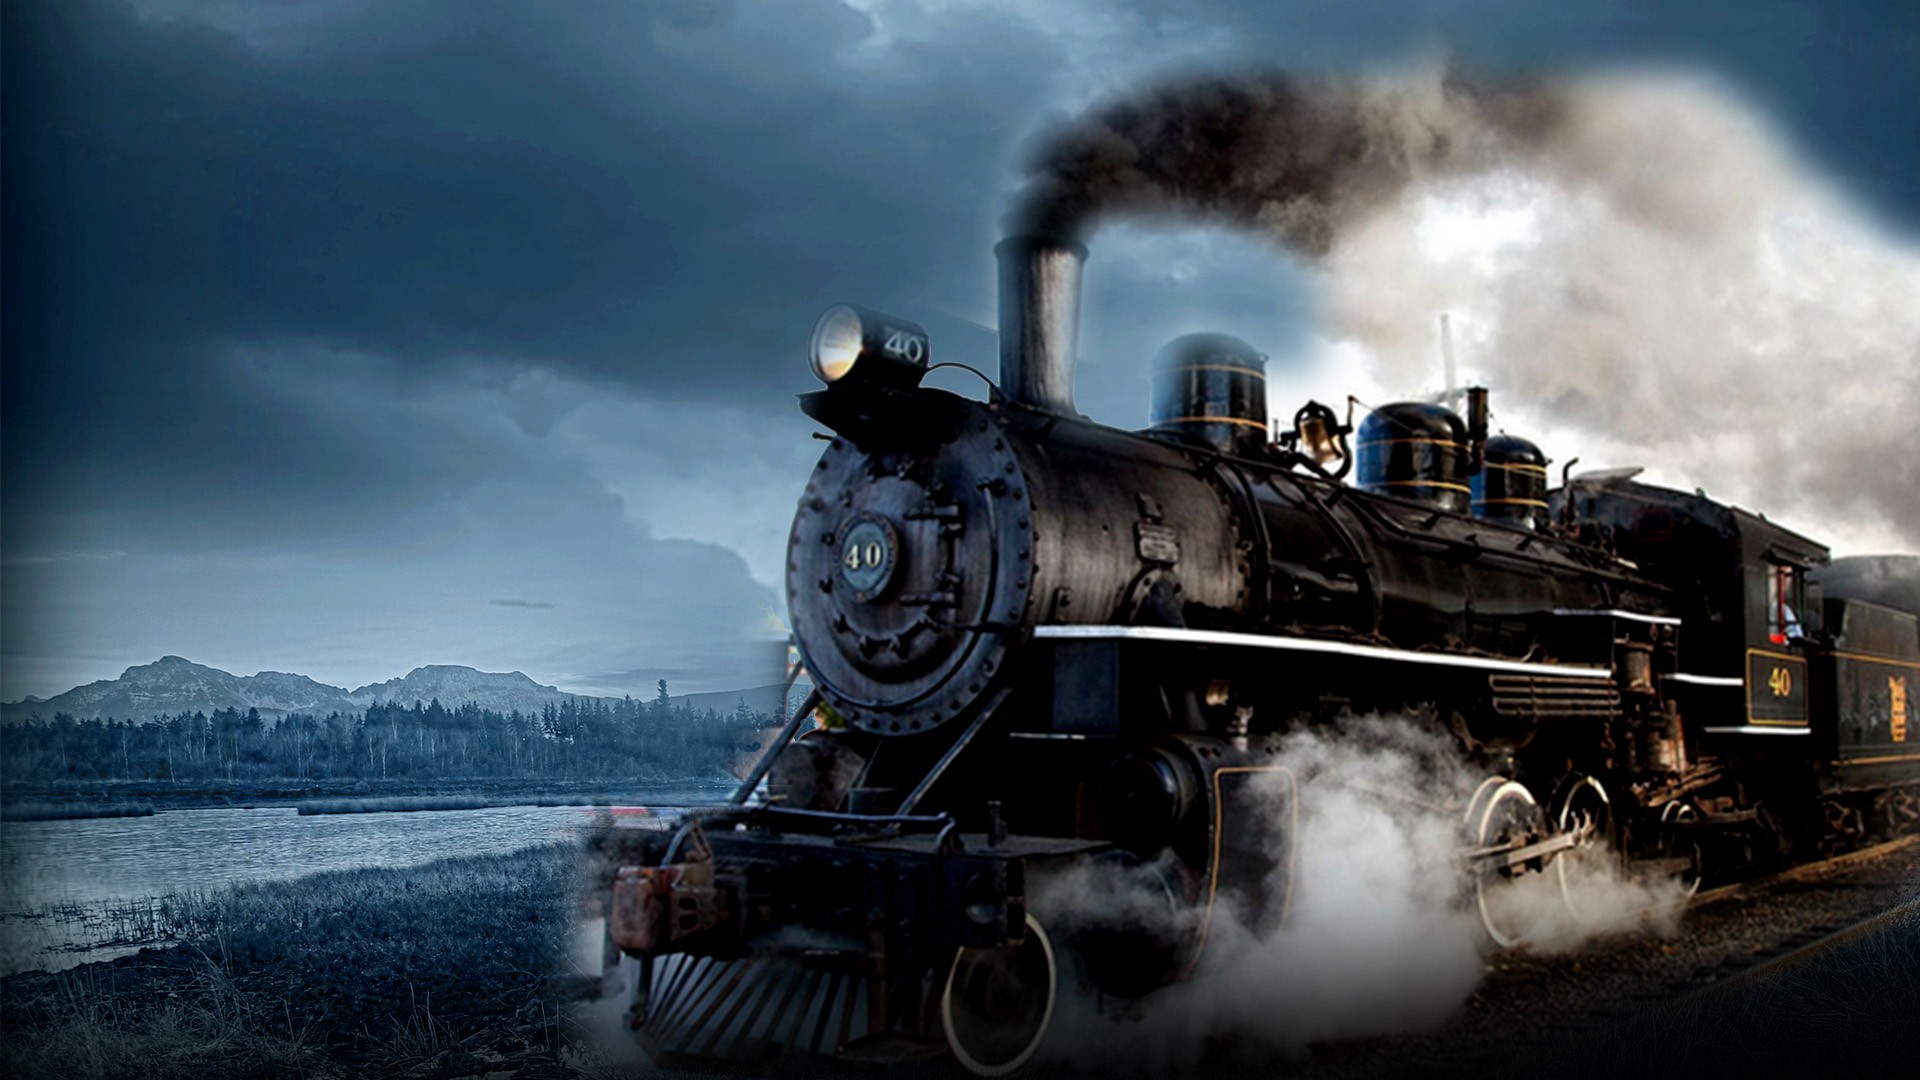 Train Background Hd Wallpapers - Train Engine , HD Wallpaper & Backgrounds